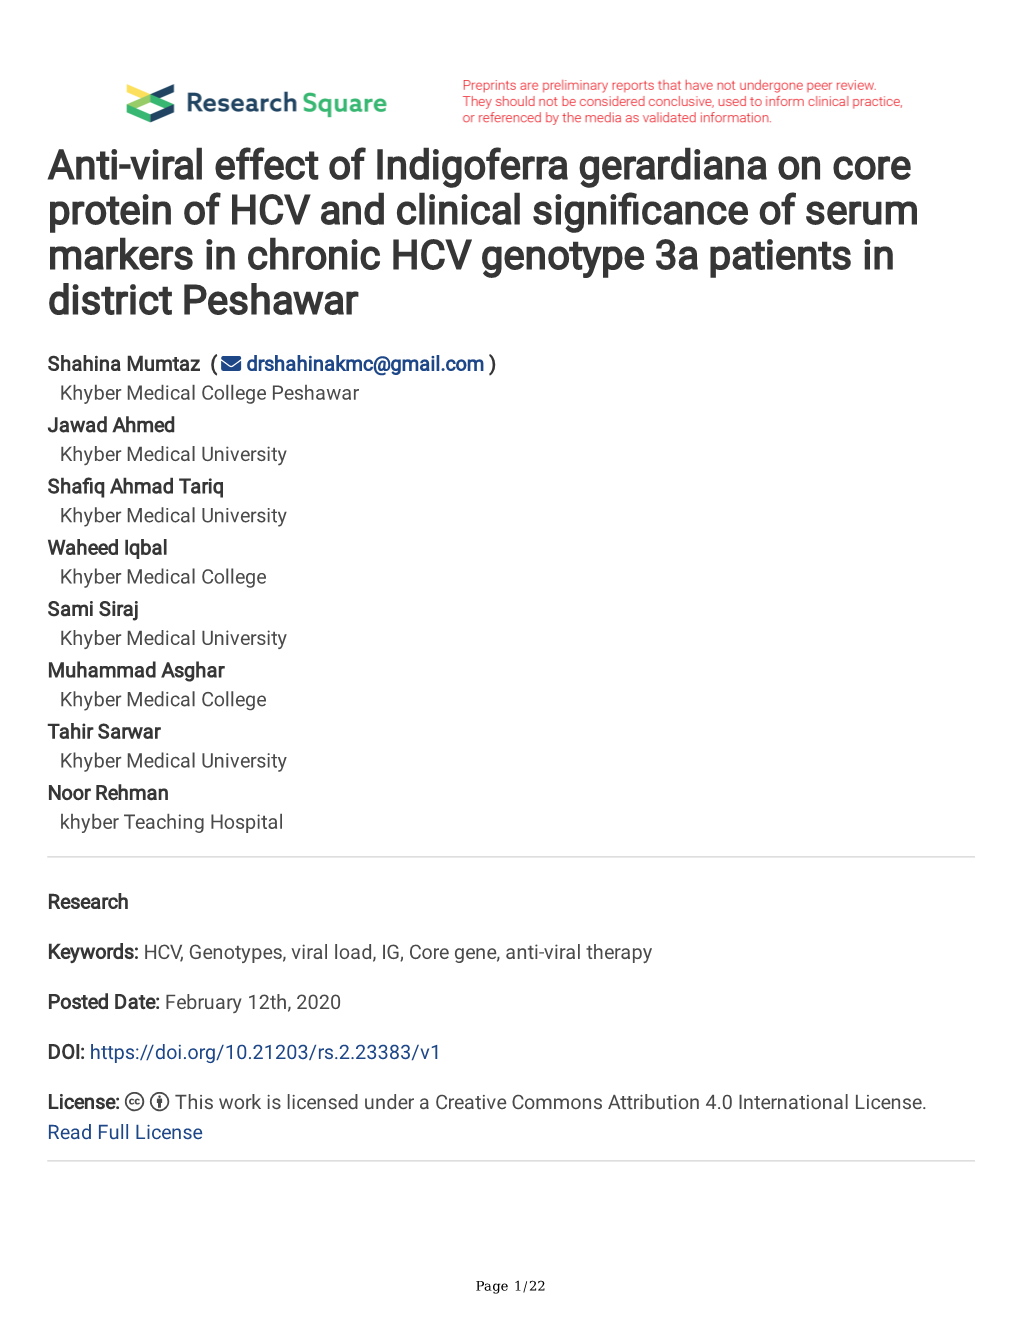 Anti-Viral Effect of Indigoferra Gerardiana on Core Protein of HCV and Clinical Signifcance of Serum Markers in Chronic HCV Genotype 3A Patients in District Peshawar